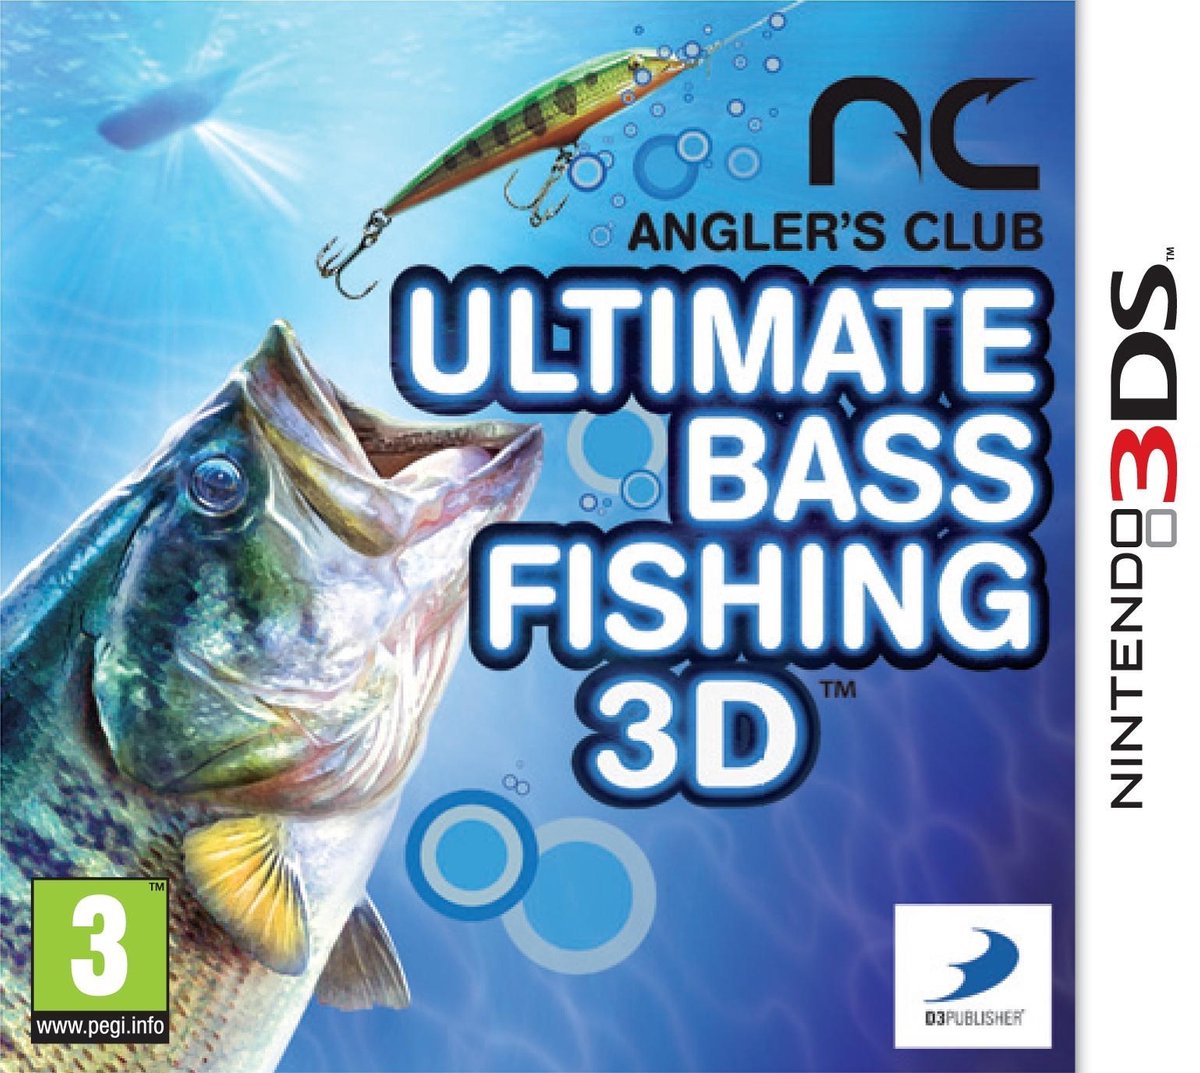 Angler's Club: Ultimate Bass Fishing 3D - 2DS + 3DS | Games | bol.com